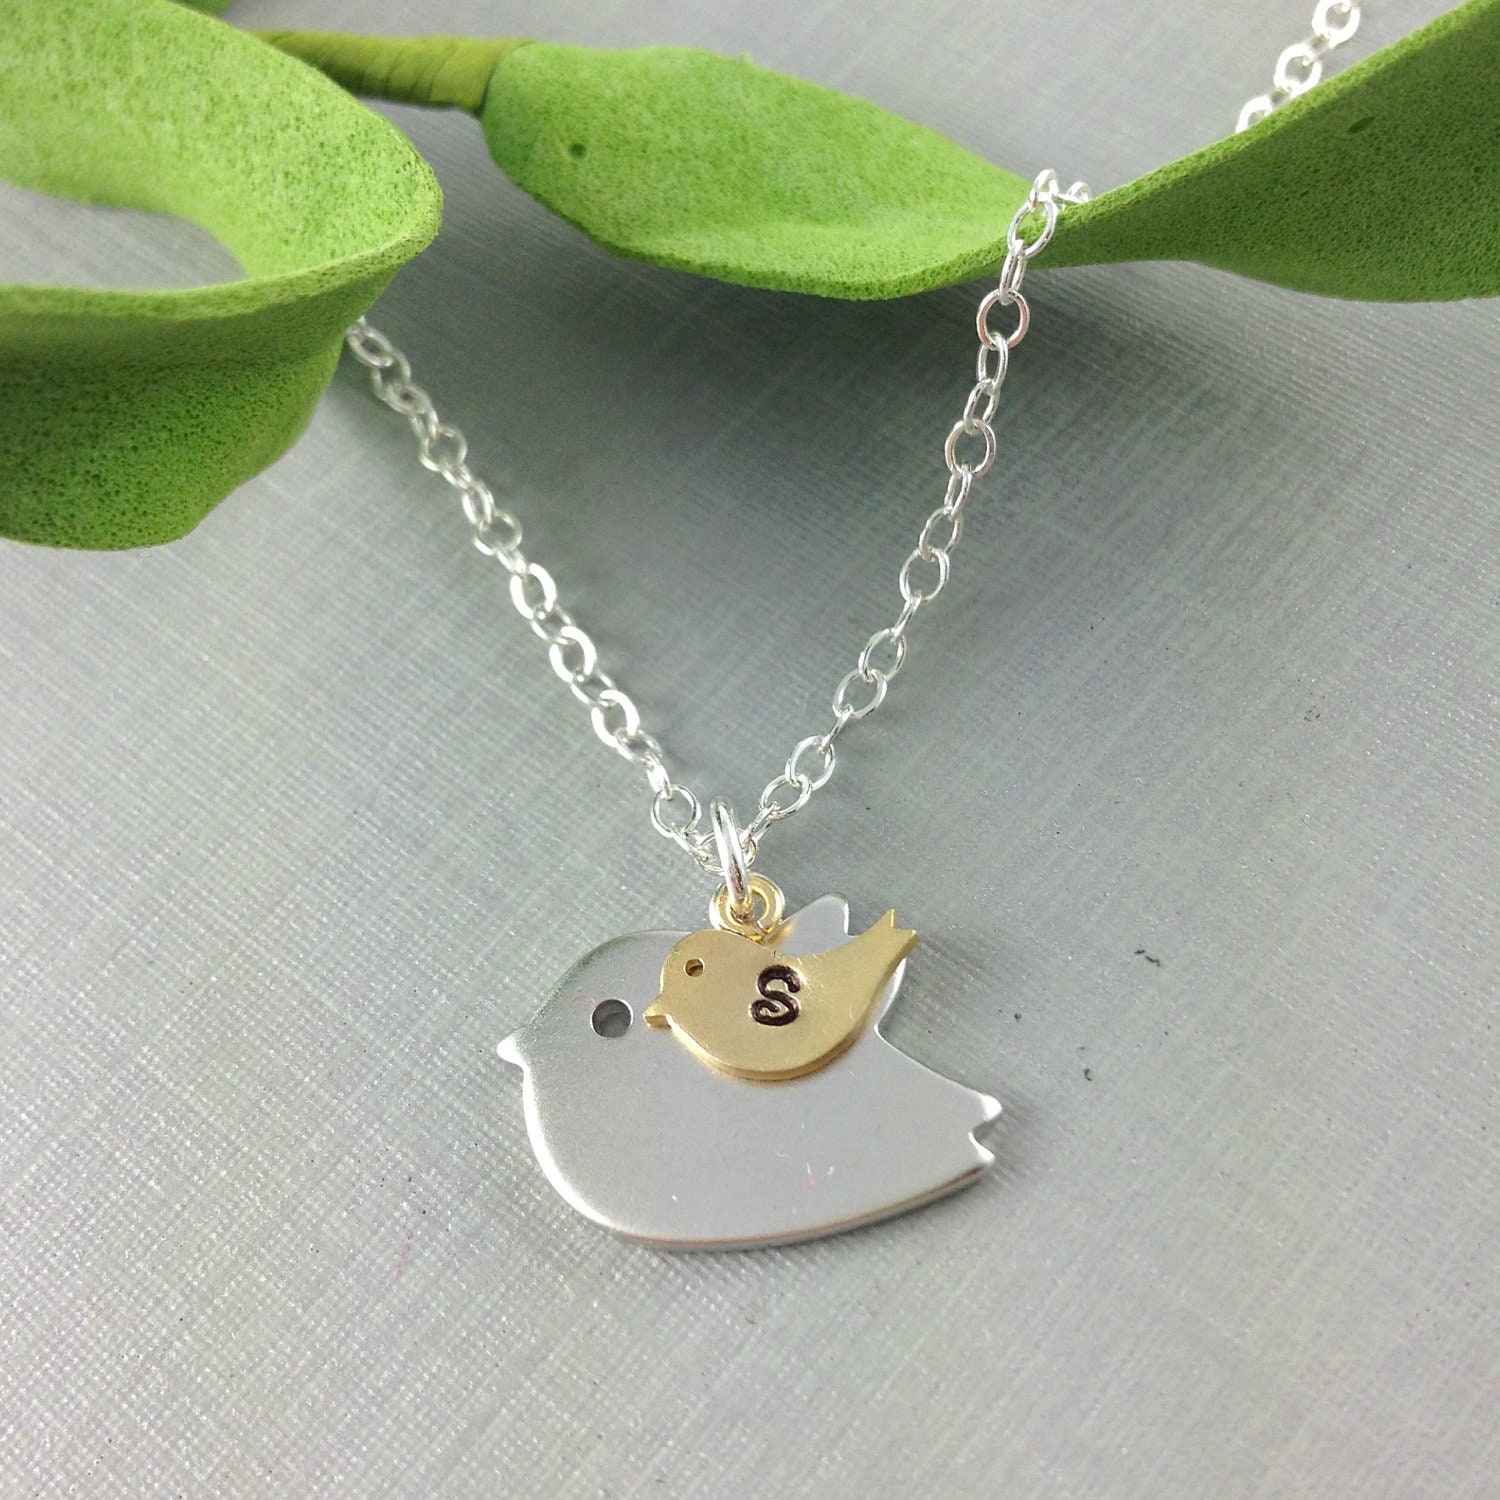 Mother Necklace, Mama Bird Baby Bird Necklace, Initial Bird Necklace, Christmas Gift, Baby Shower Gift, New Mom Gift, Mother Daughter, Gift - anatoliantaledesign